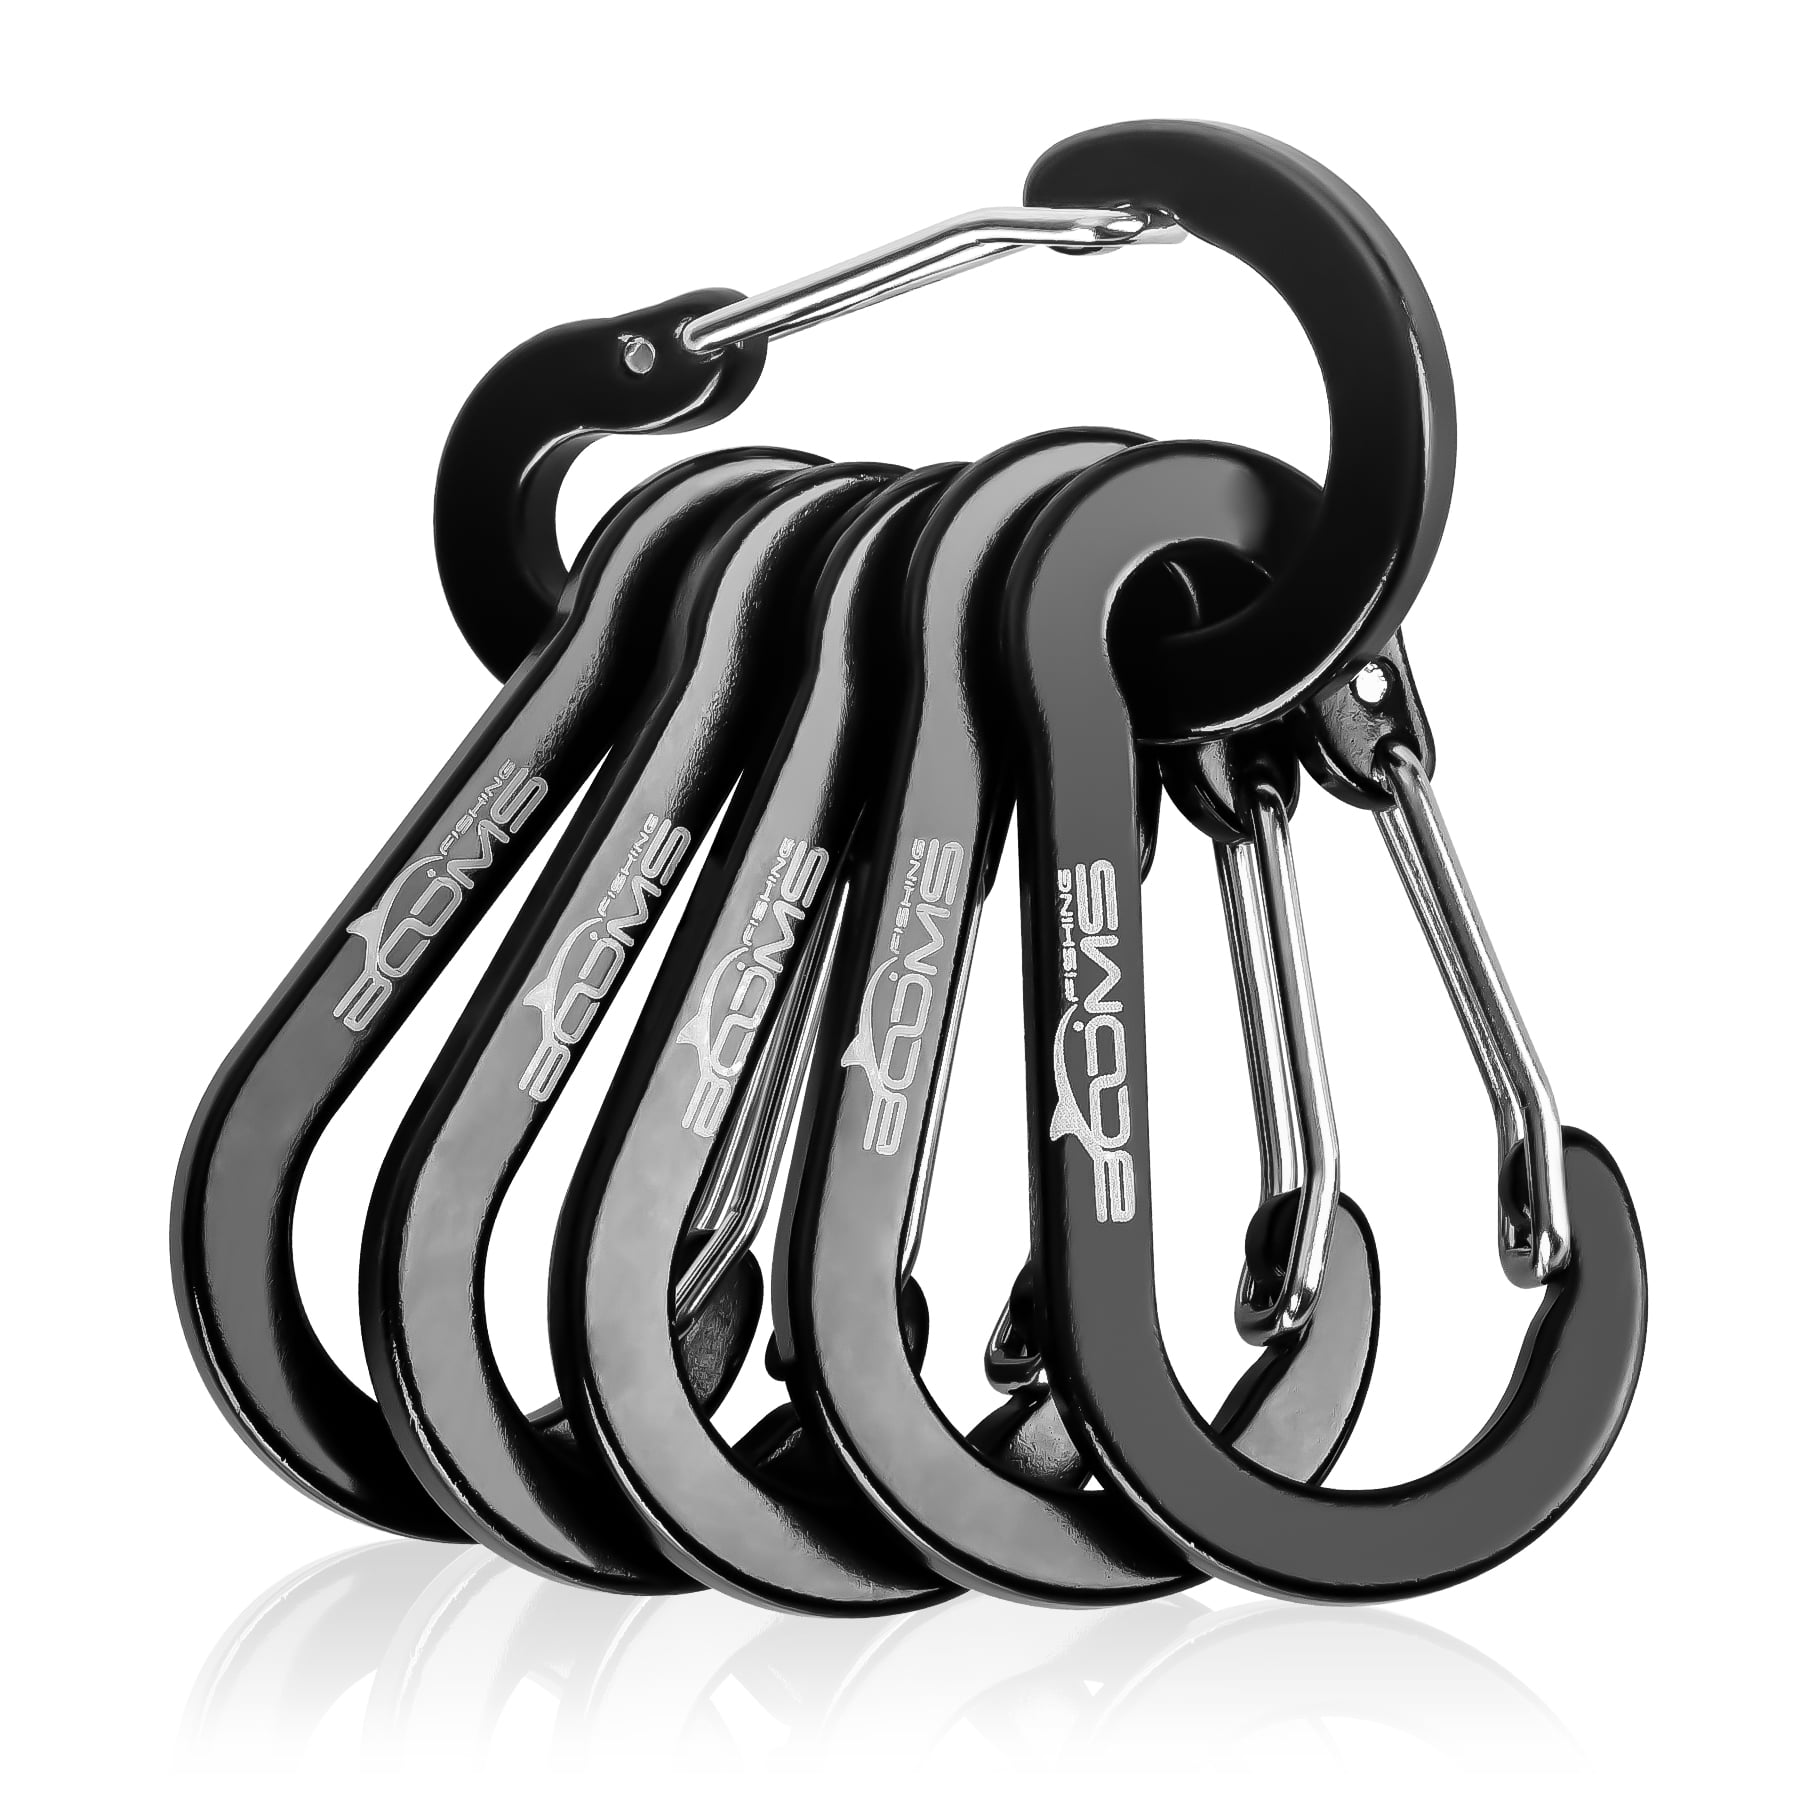 5 Pieces Wire Gate Climbing Carabiner Hook Quick-draw Hiking Buckle Clasp 